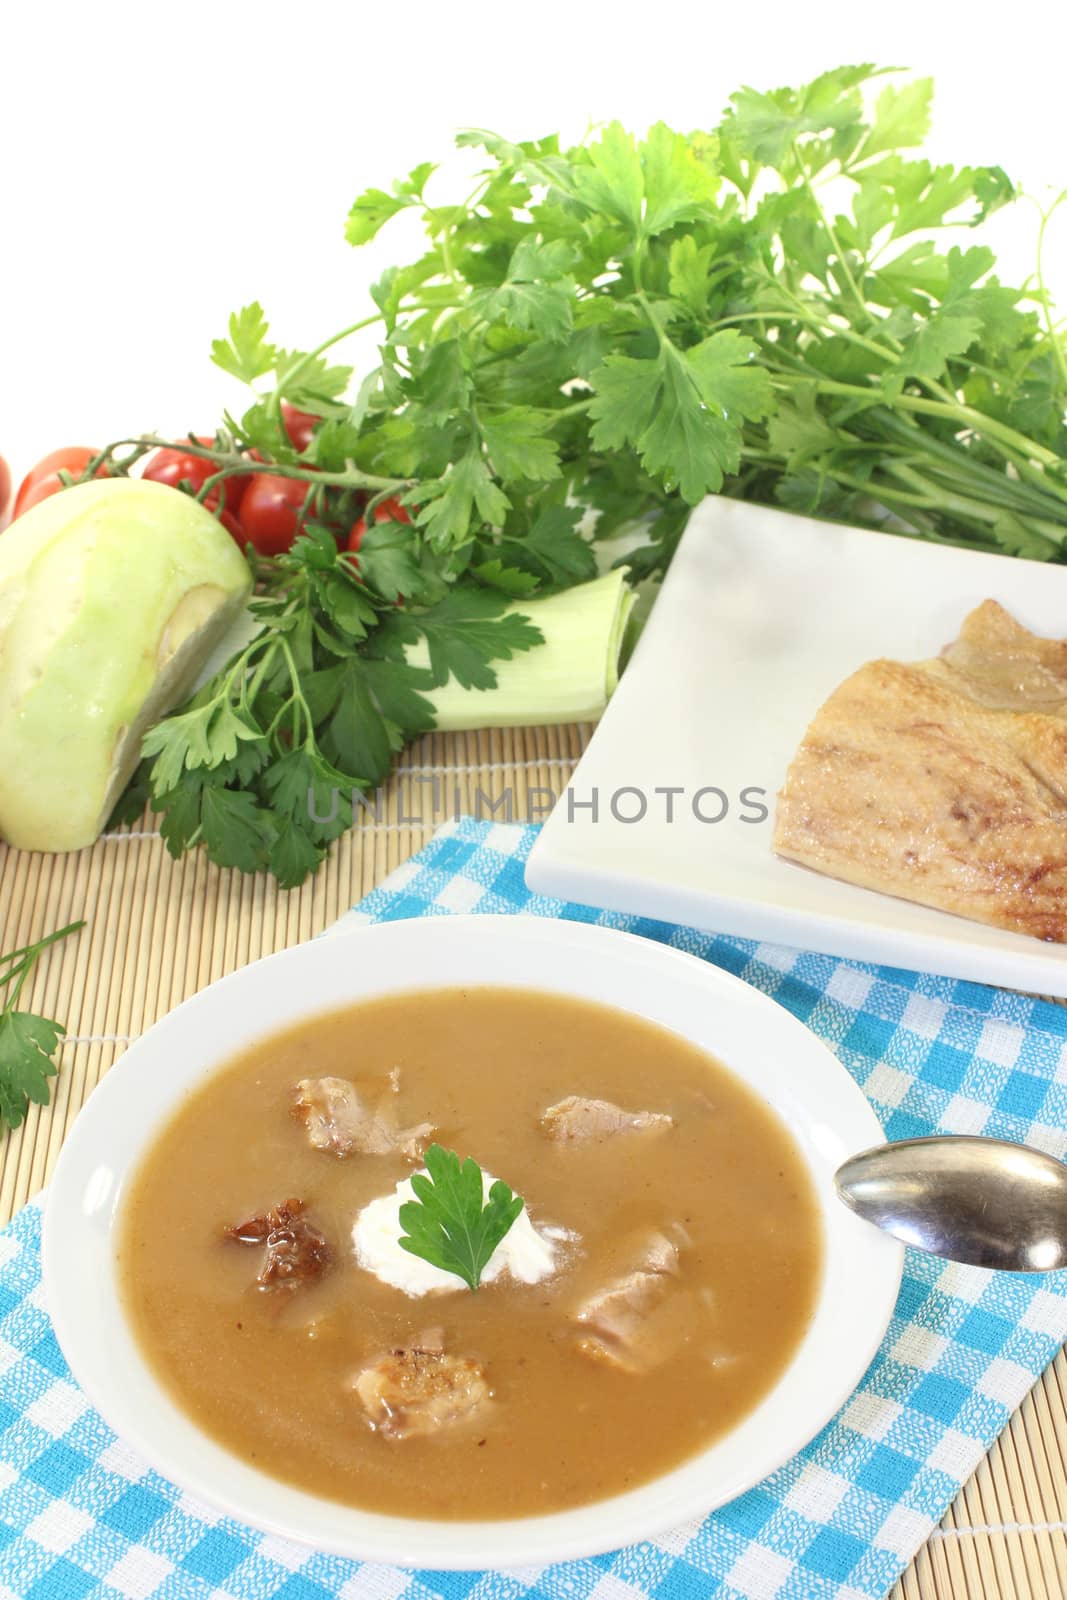 delicious duck soup on a light background